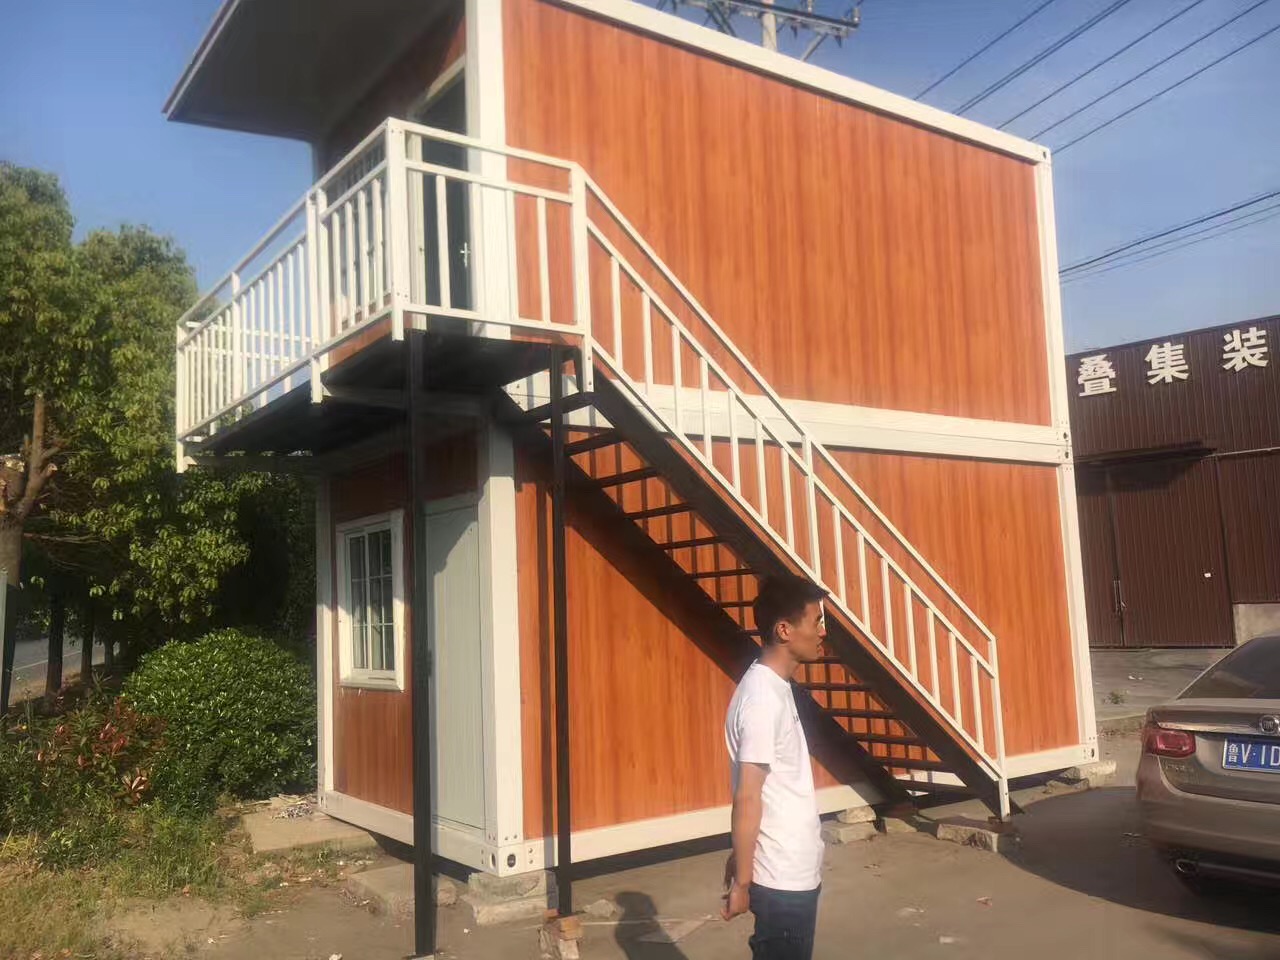 Chinese container houses can be prefab office pods,office pods,outdoor office pod,garden office pod,home office pod for sale 